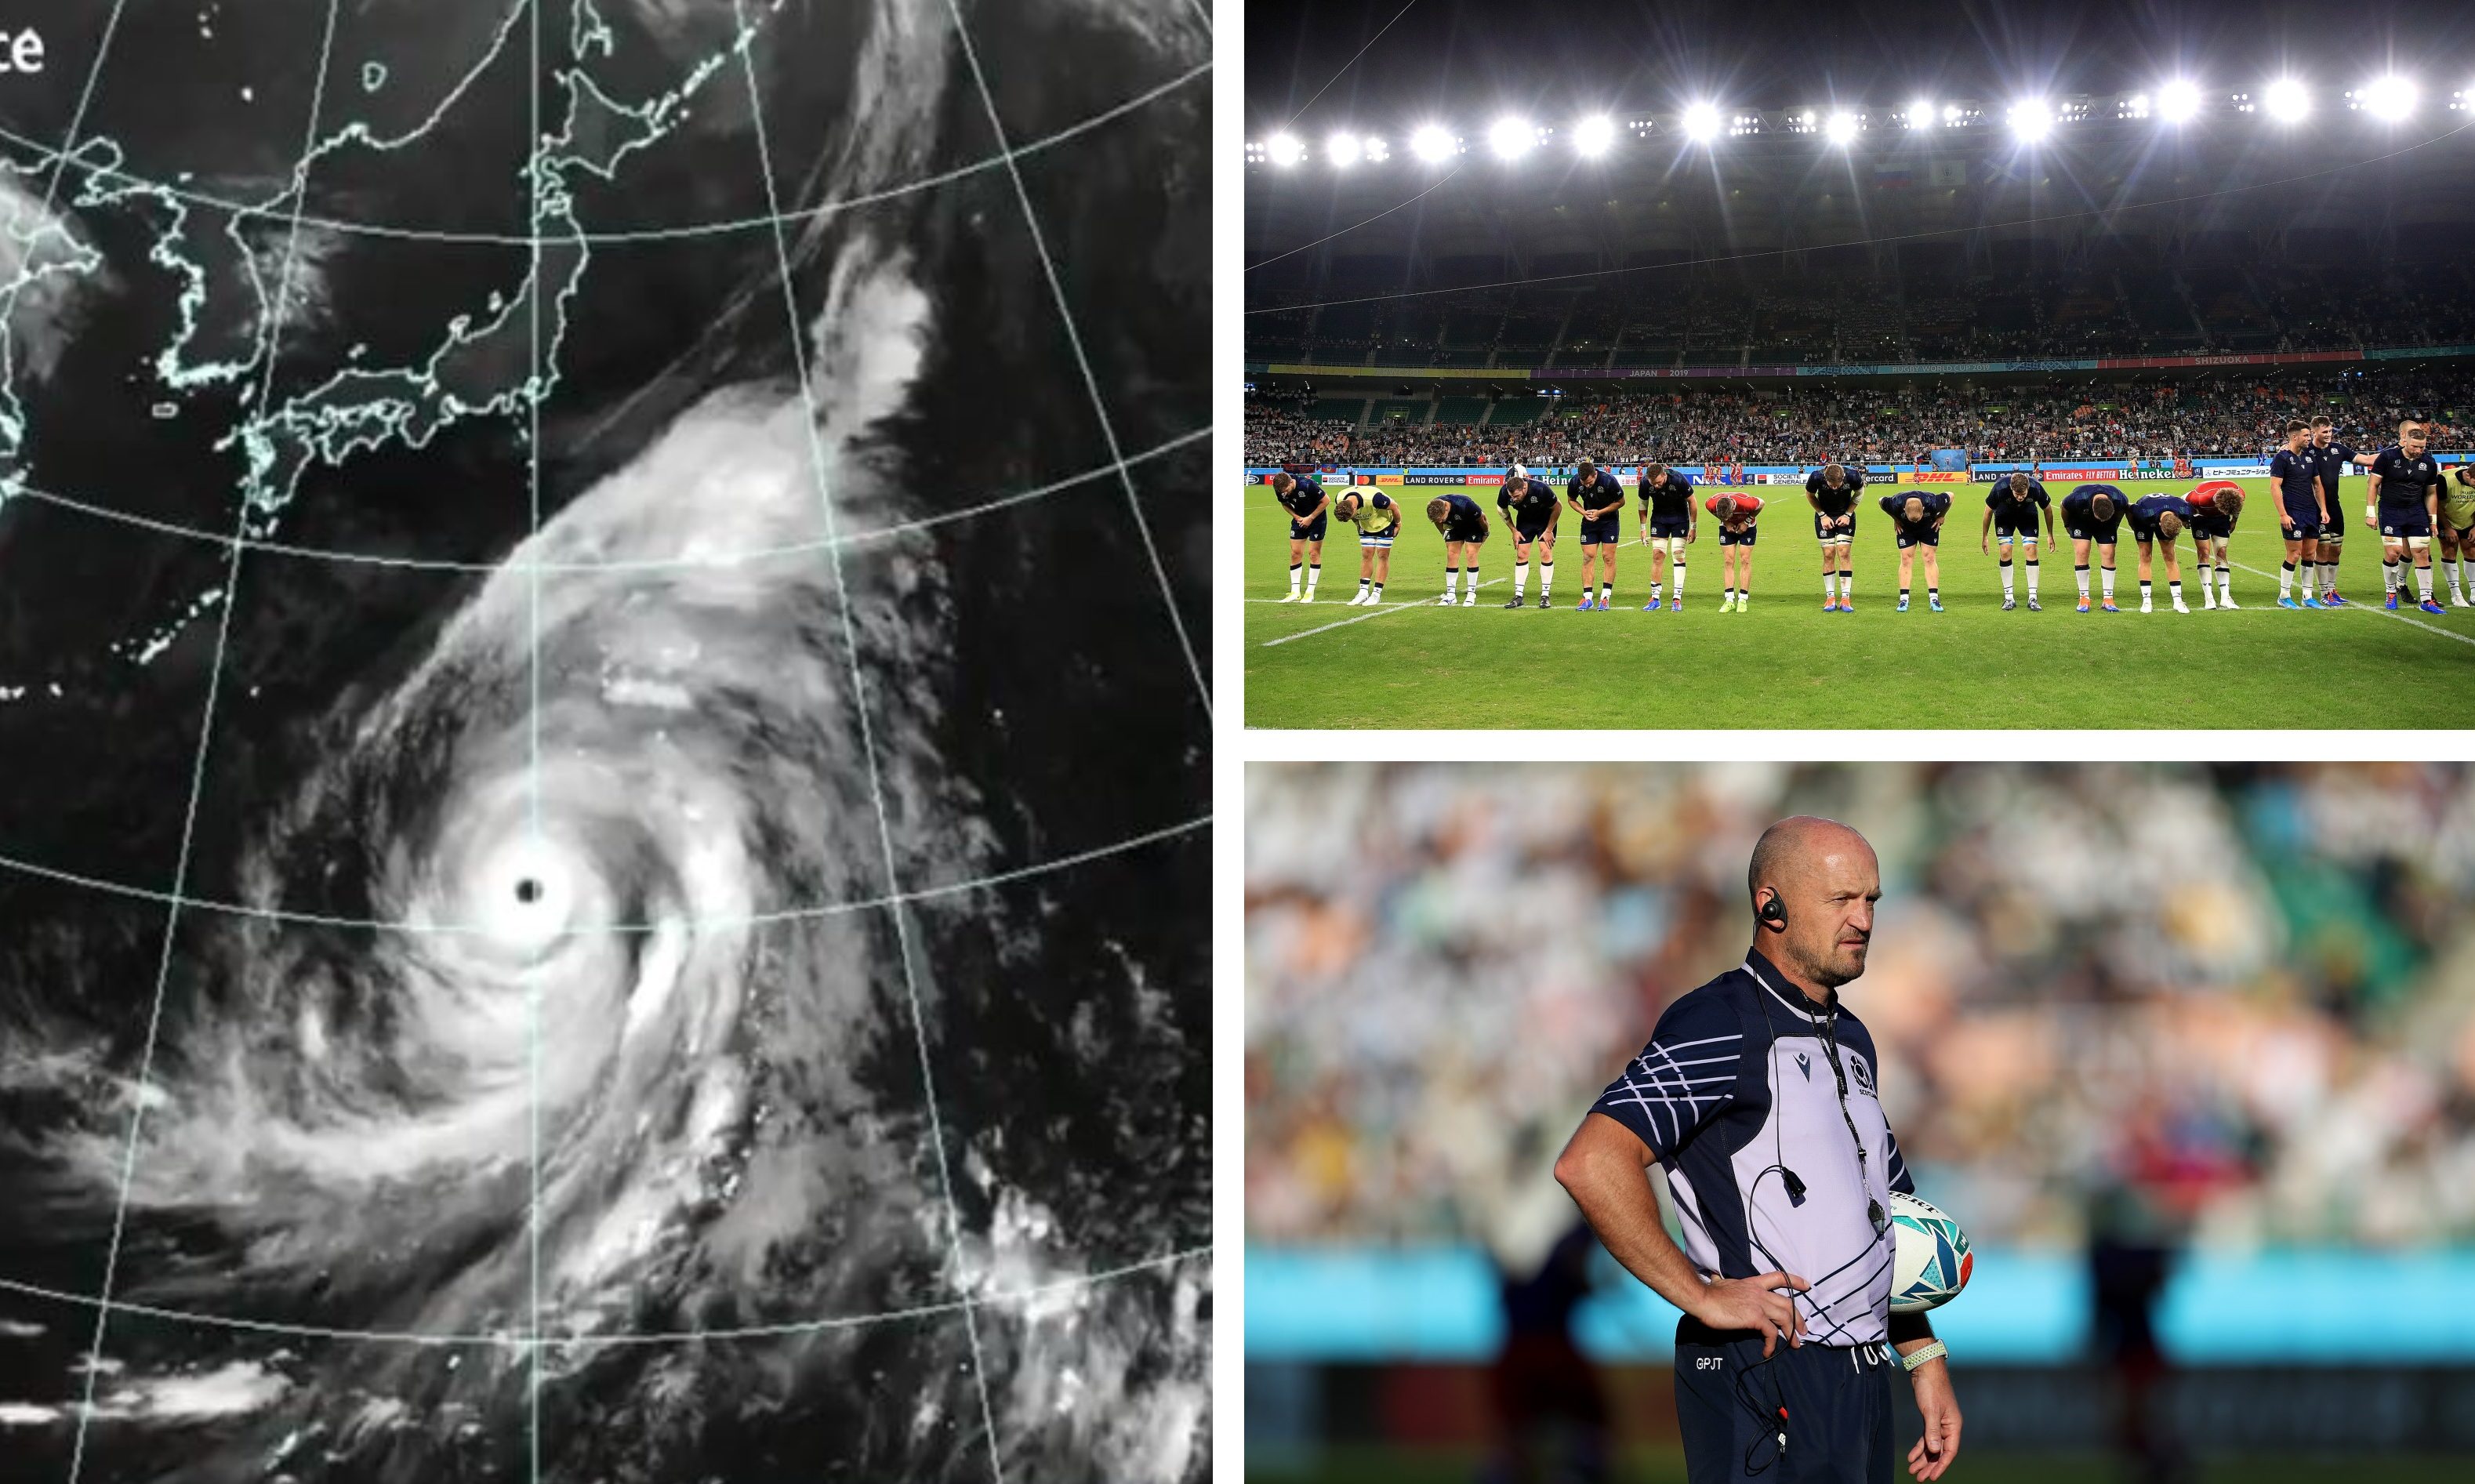 Scotland's game against Japan could be called off due to Typhoon Hagibis.